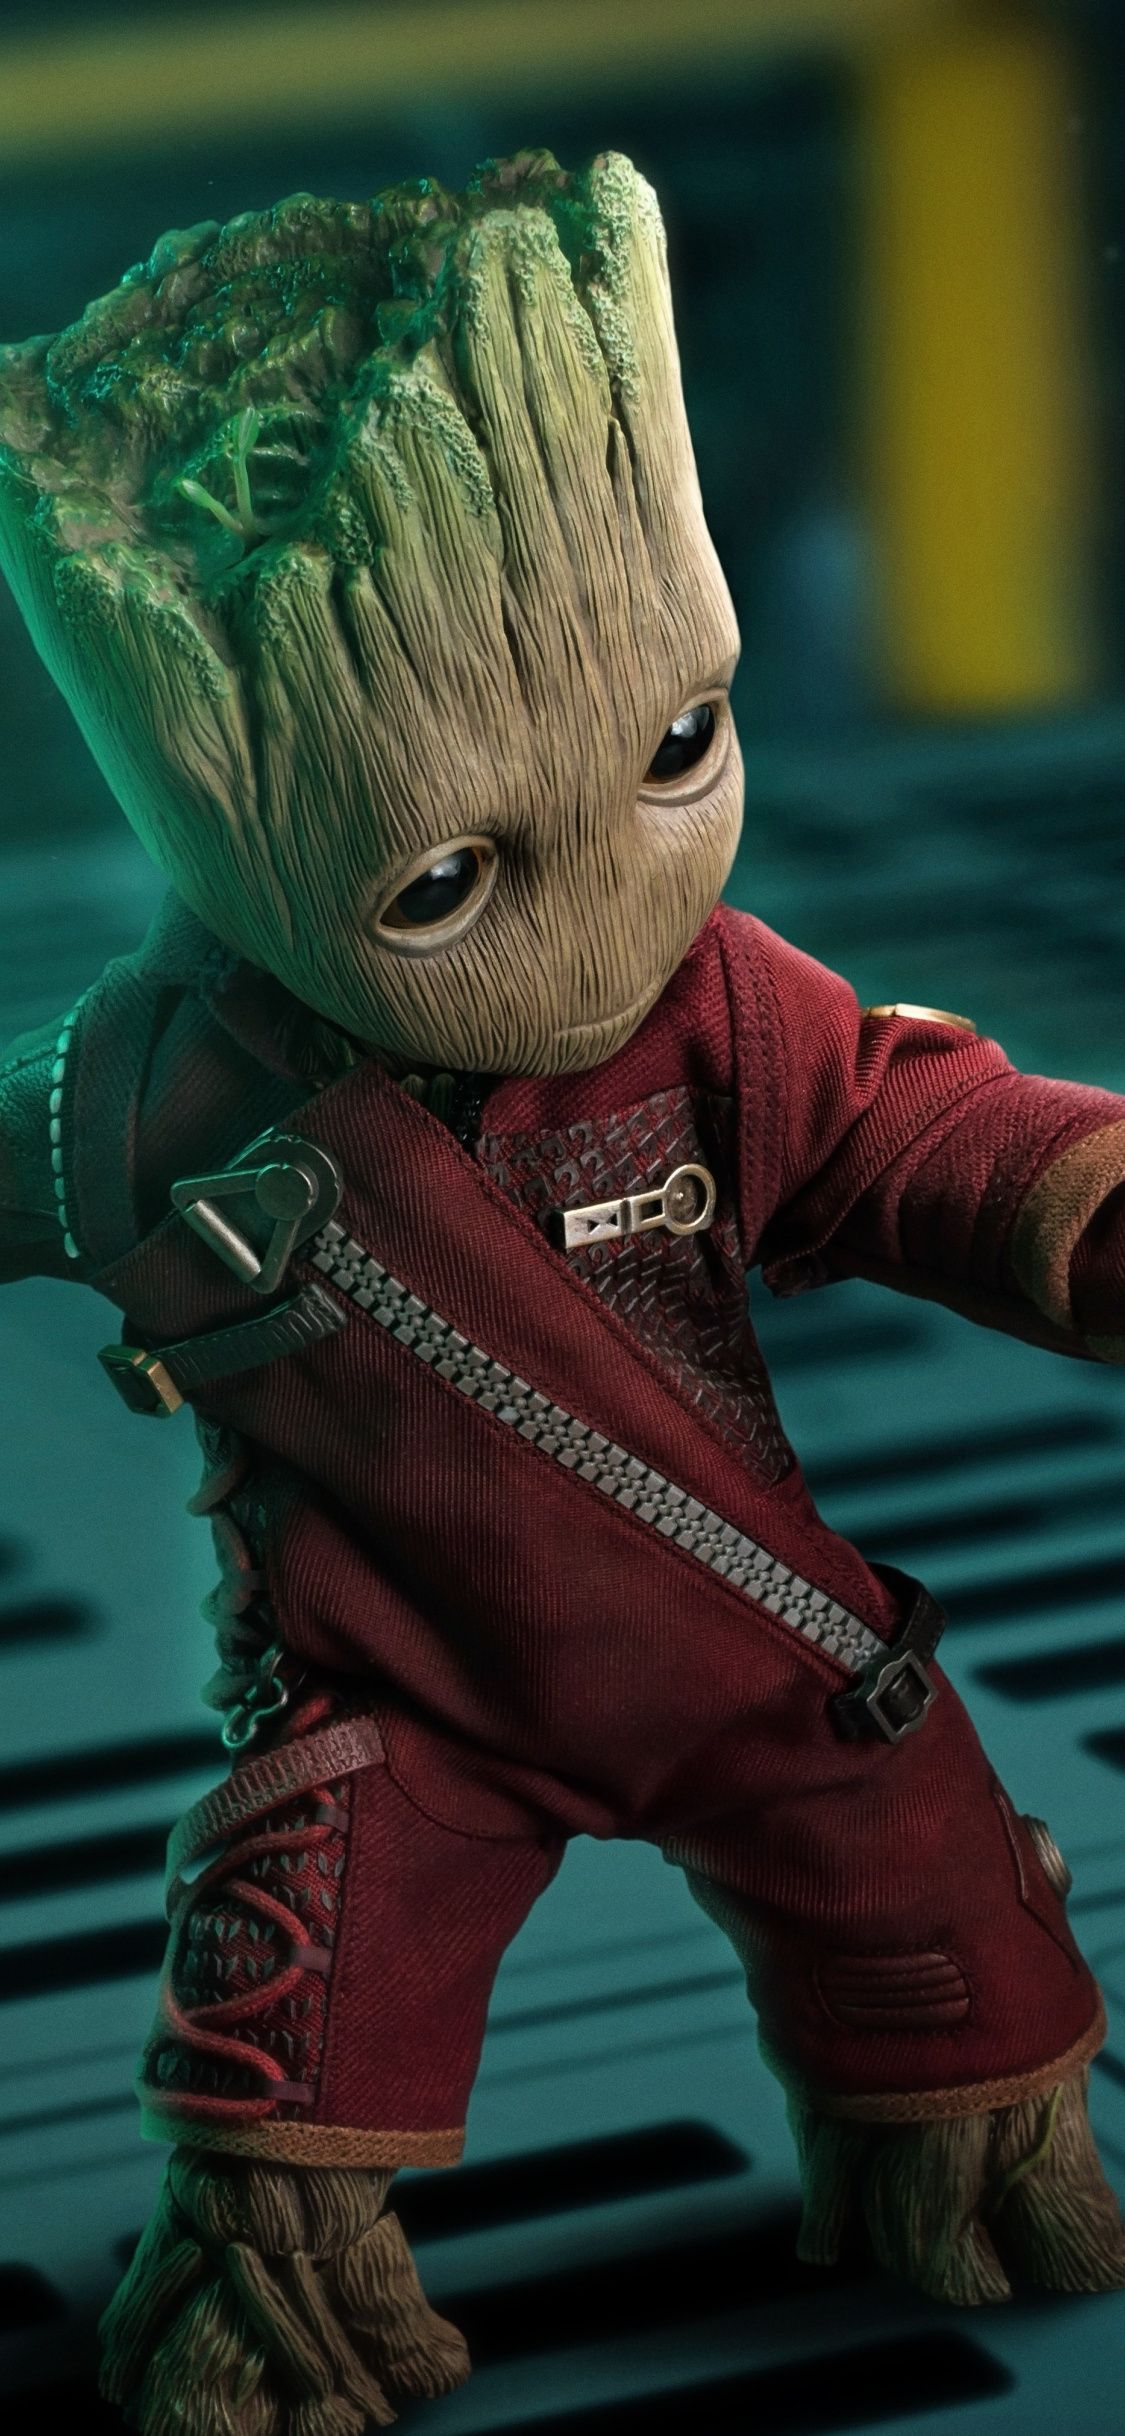 Baby groot, guardians of the galaxy, marvel, toy art wallpaper, 5906x HD image, picture, f9a01421